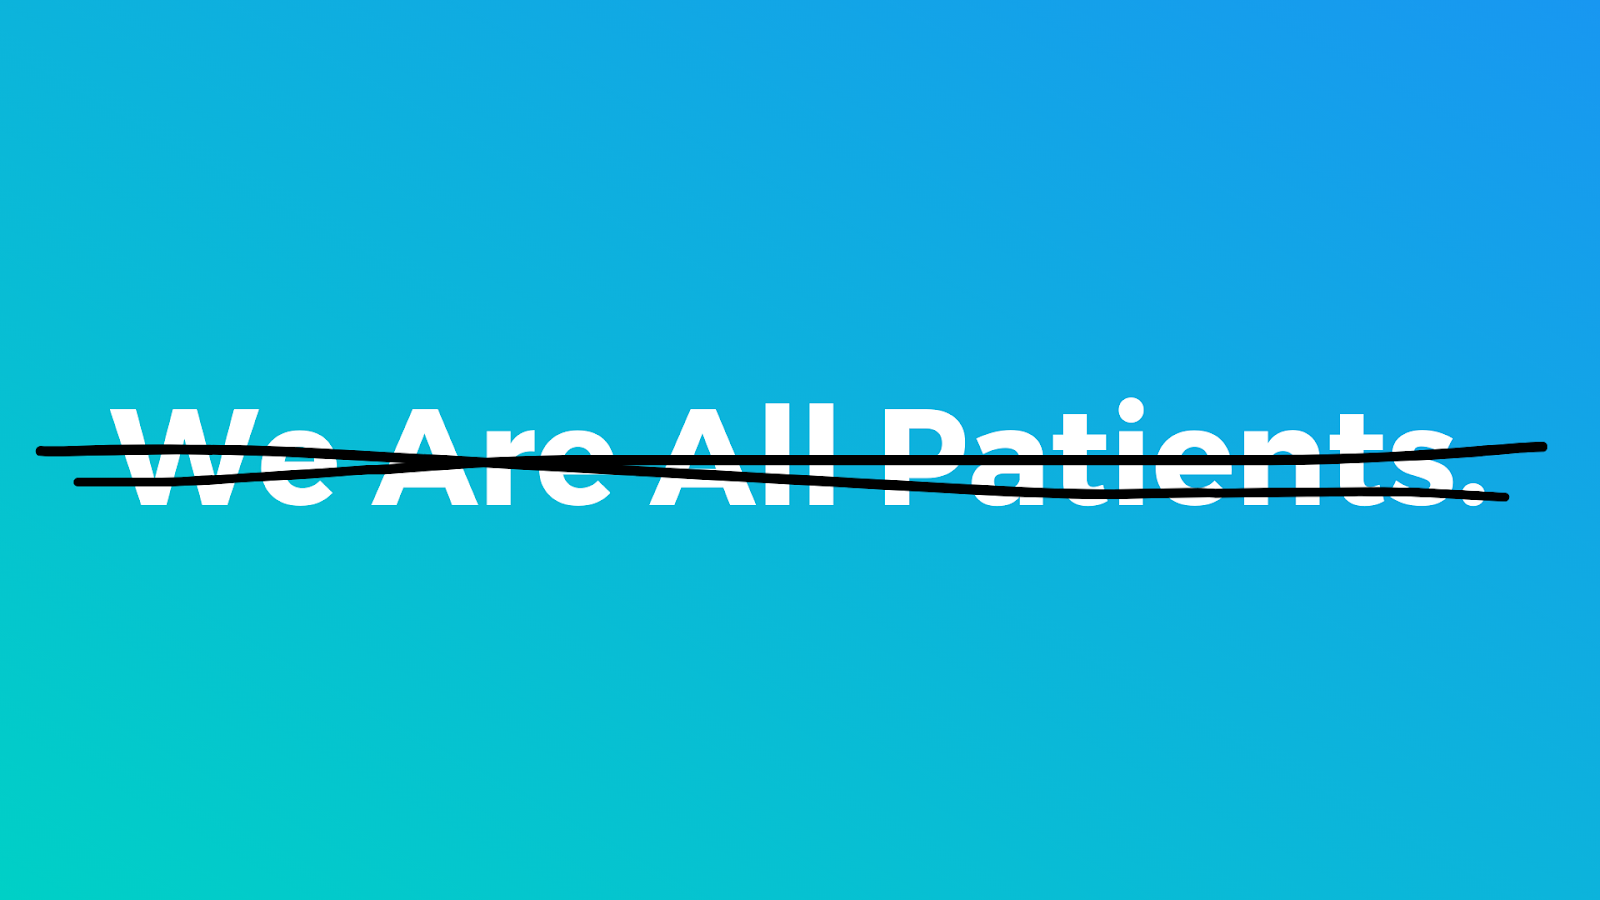 “We Are All Patients” is the “All Lives Matter” of Patient Advocacy | Savvy Cooperative | #AskPatients